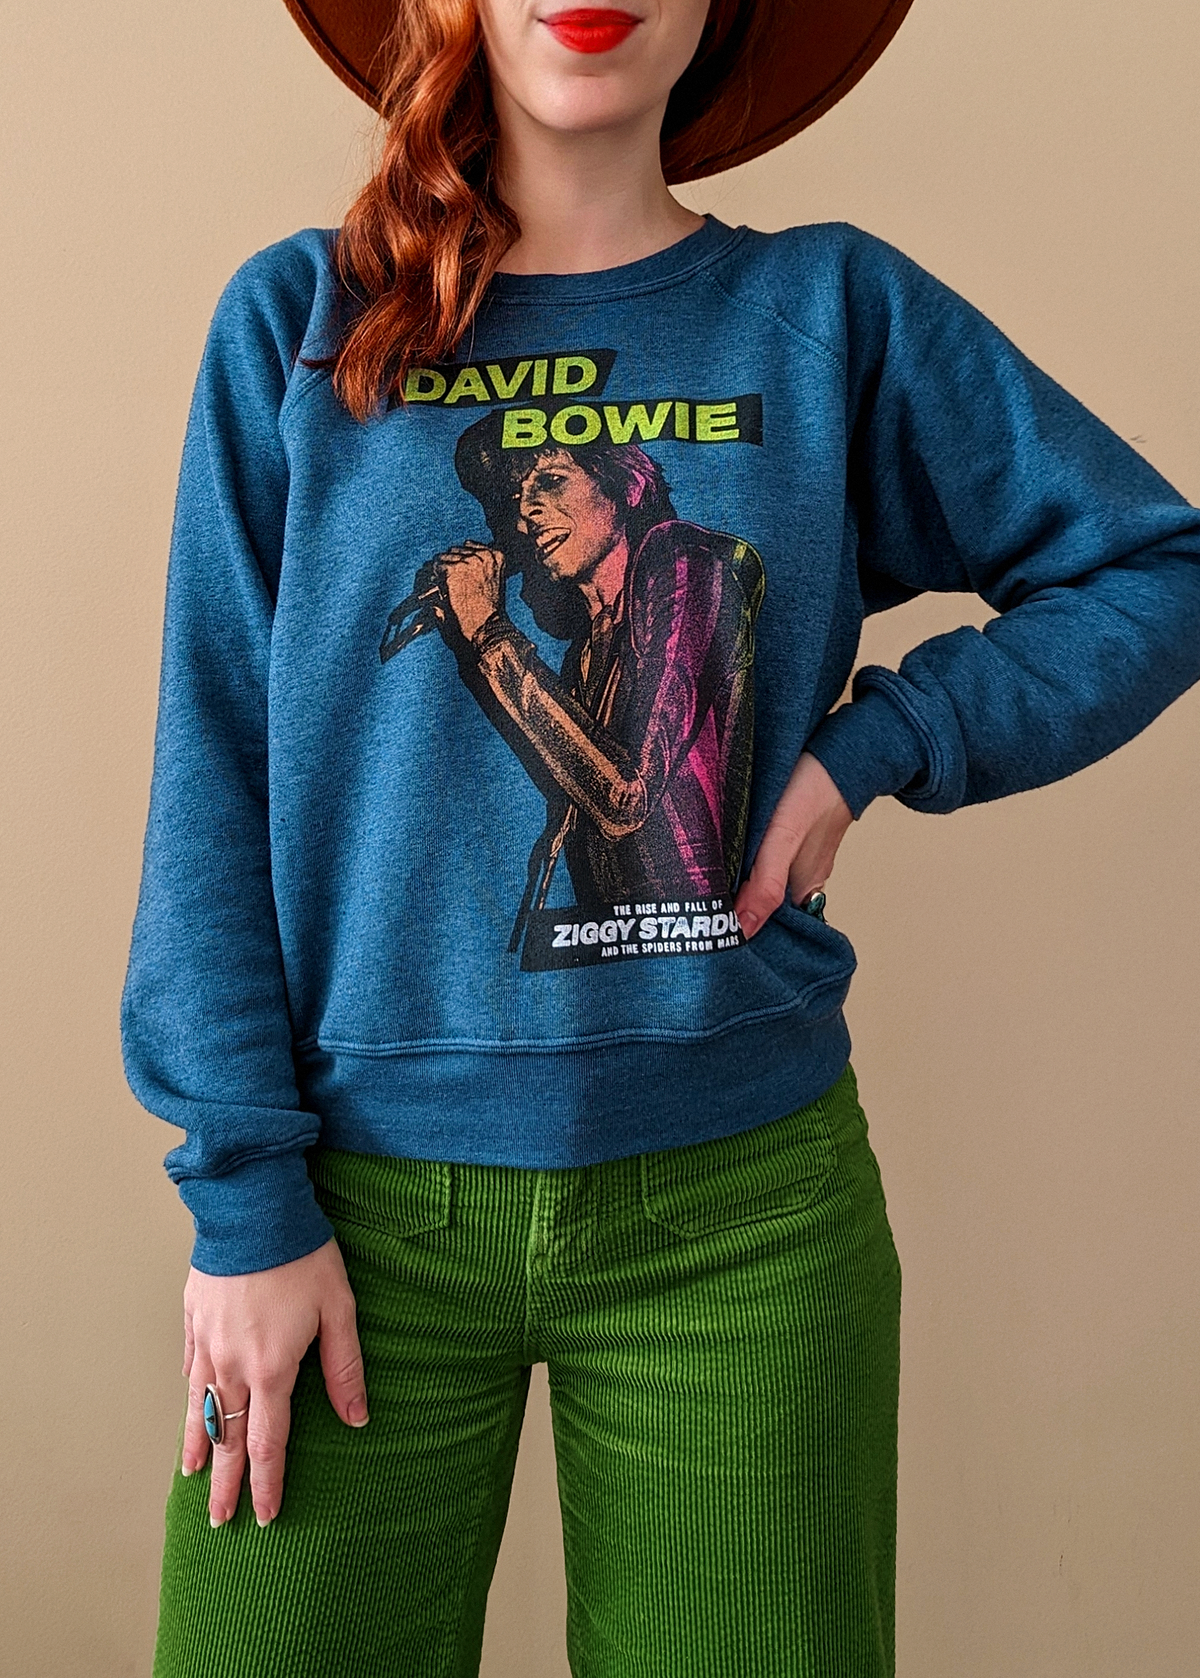 Super soft David Bowie Ziggy Stardust raglan crew neck sweatshirt in teal by Daydreamer LA, made in California and officially licensed